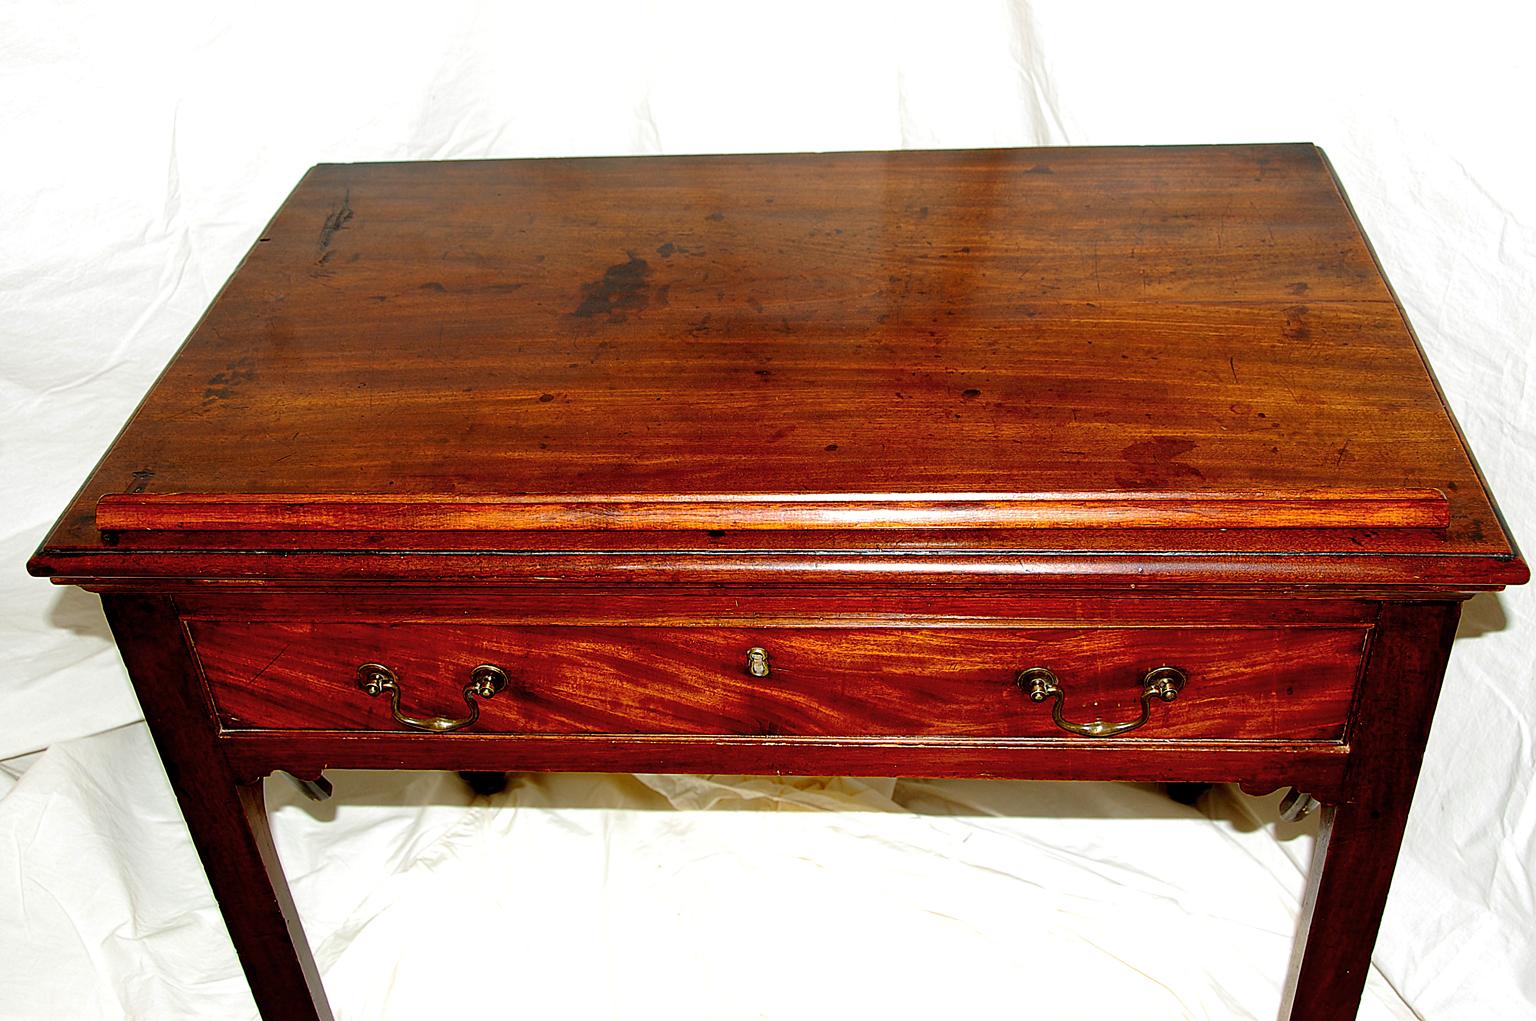 George III English Georgian Chippendale Mahogany Architect's Table with Candle Slides